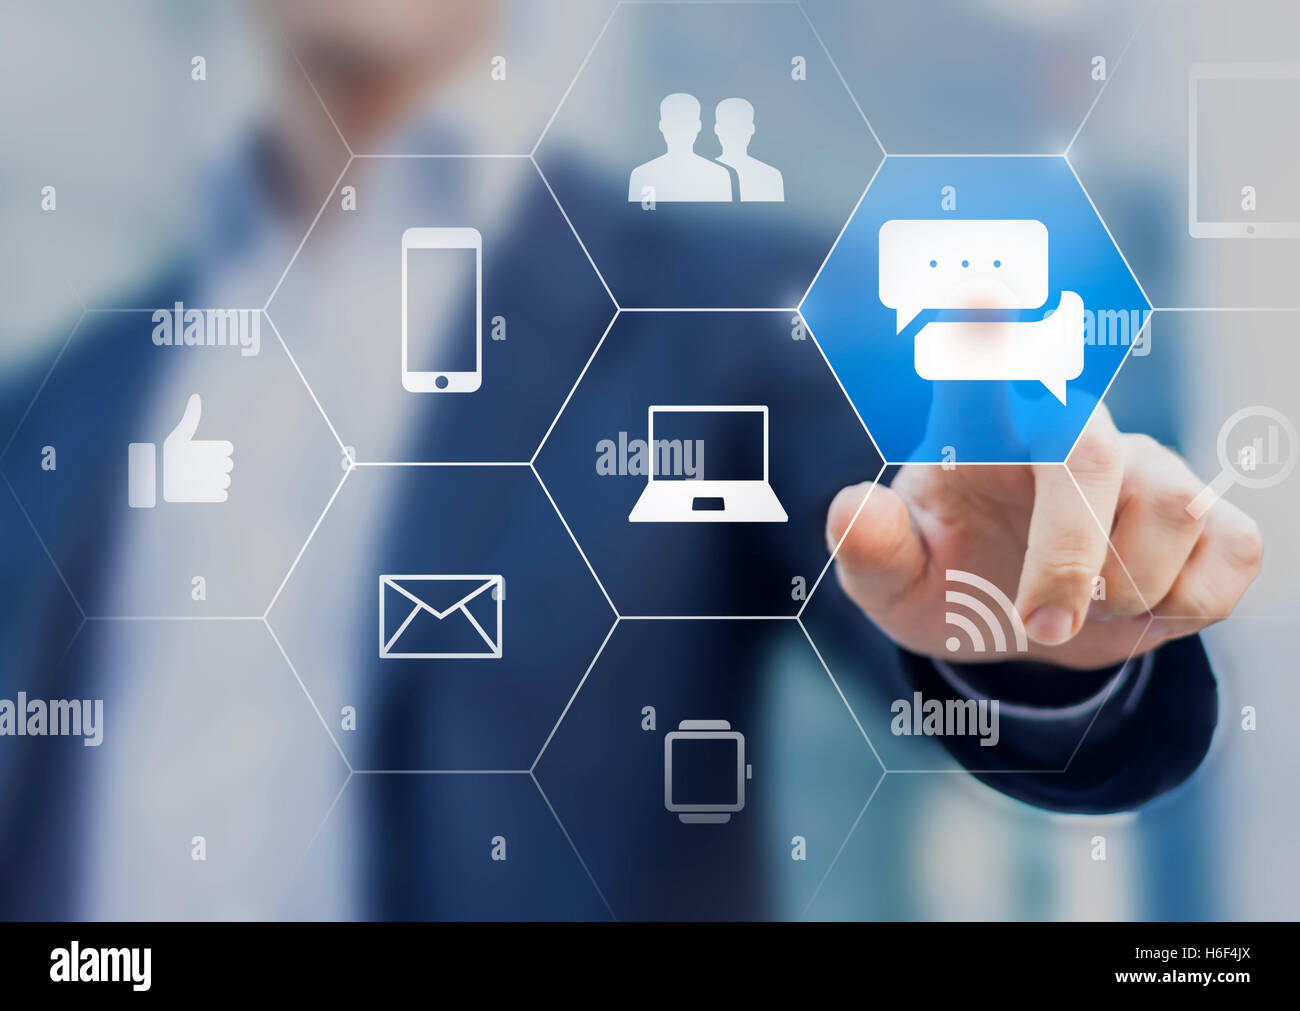 Communication, concept about comment or feedback, button with speech bubbles icon or chat Stock Photo